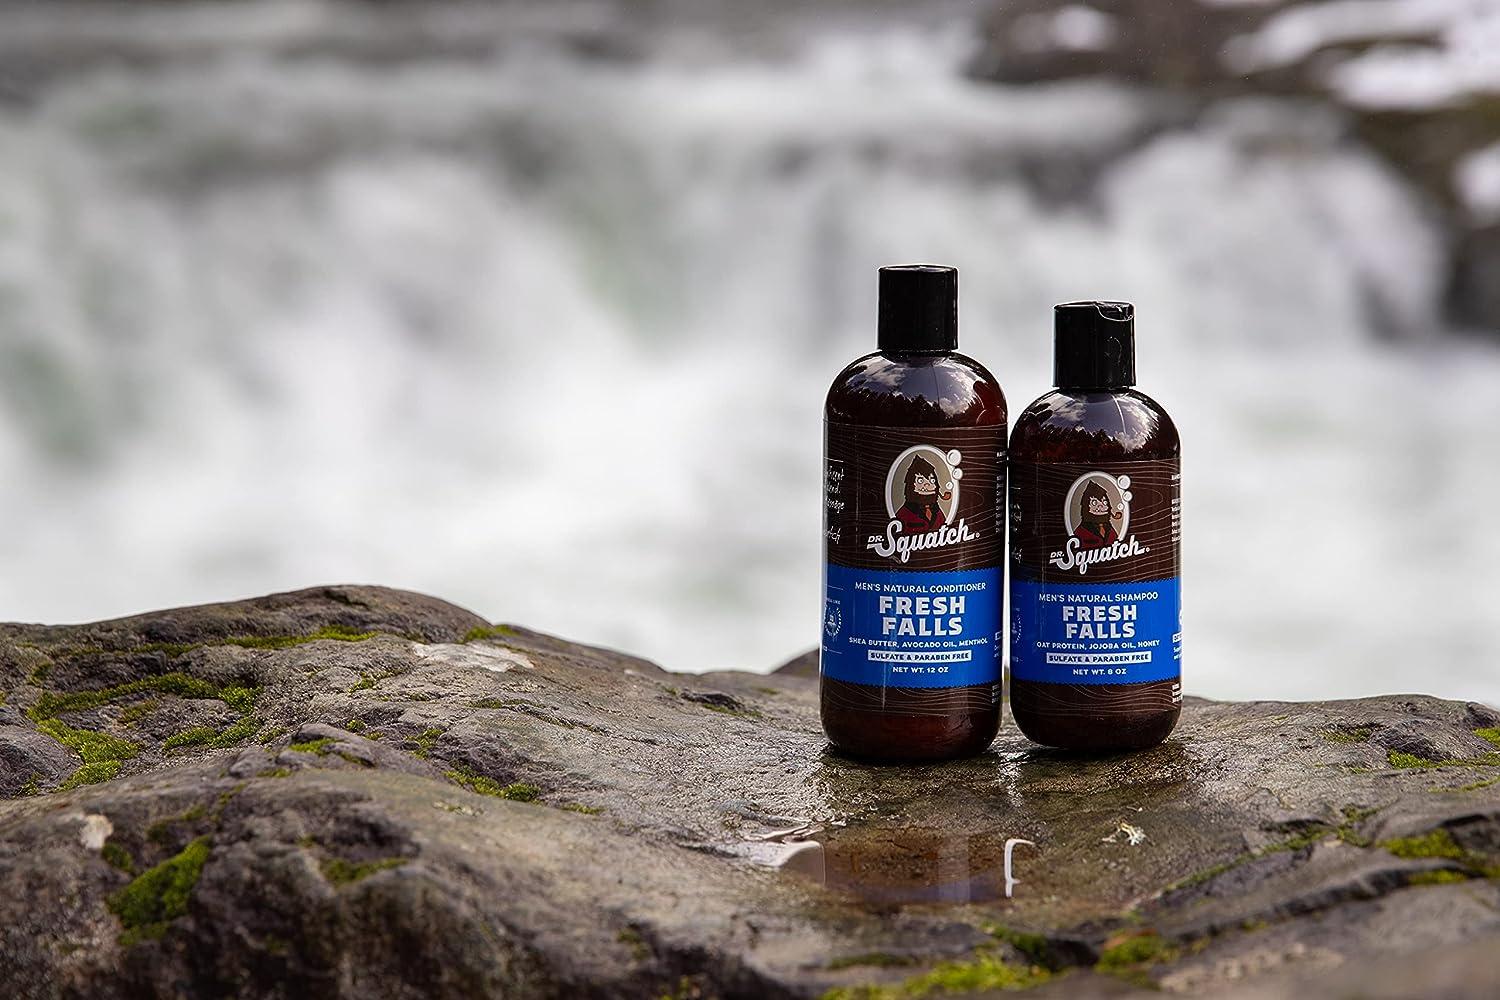 Dr. Squatch - ❄️PRODUCT DROP❄️ Embrace the cold and invigorate your senses  with a new batch of Squatchmas cheer 😎 LIMITED EDITION Frosty Peppermint,  Frosty Peppermint Haircare, and Snowy Pine Tar is